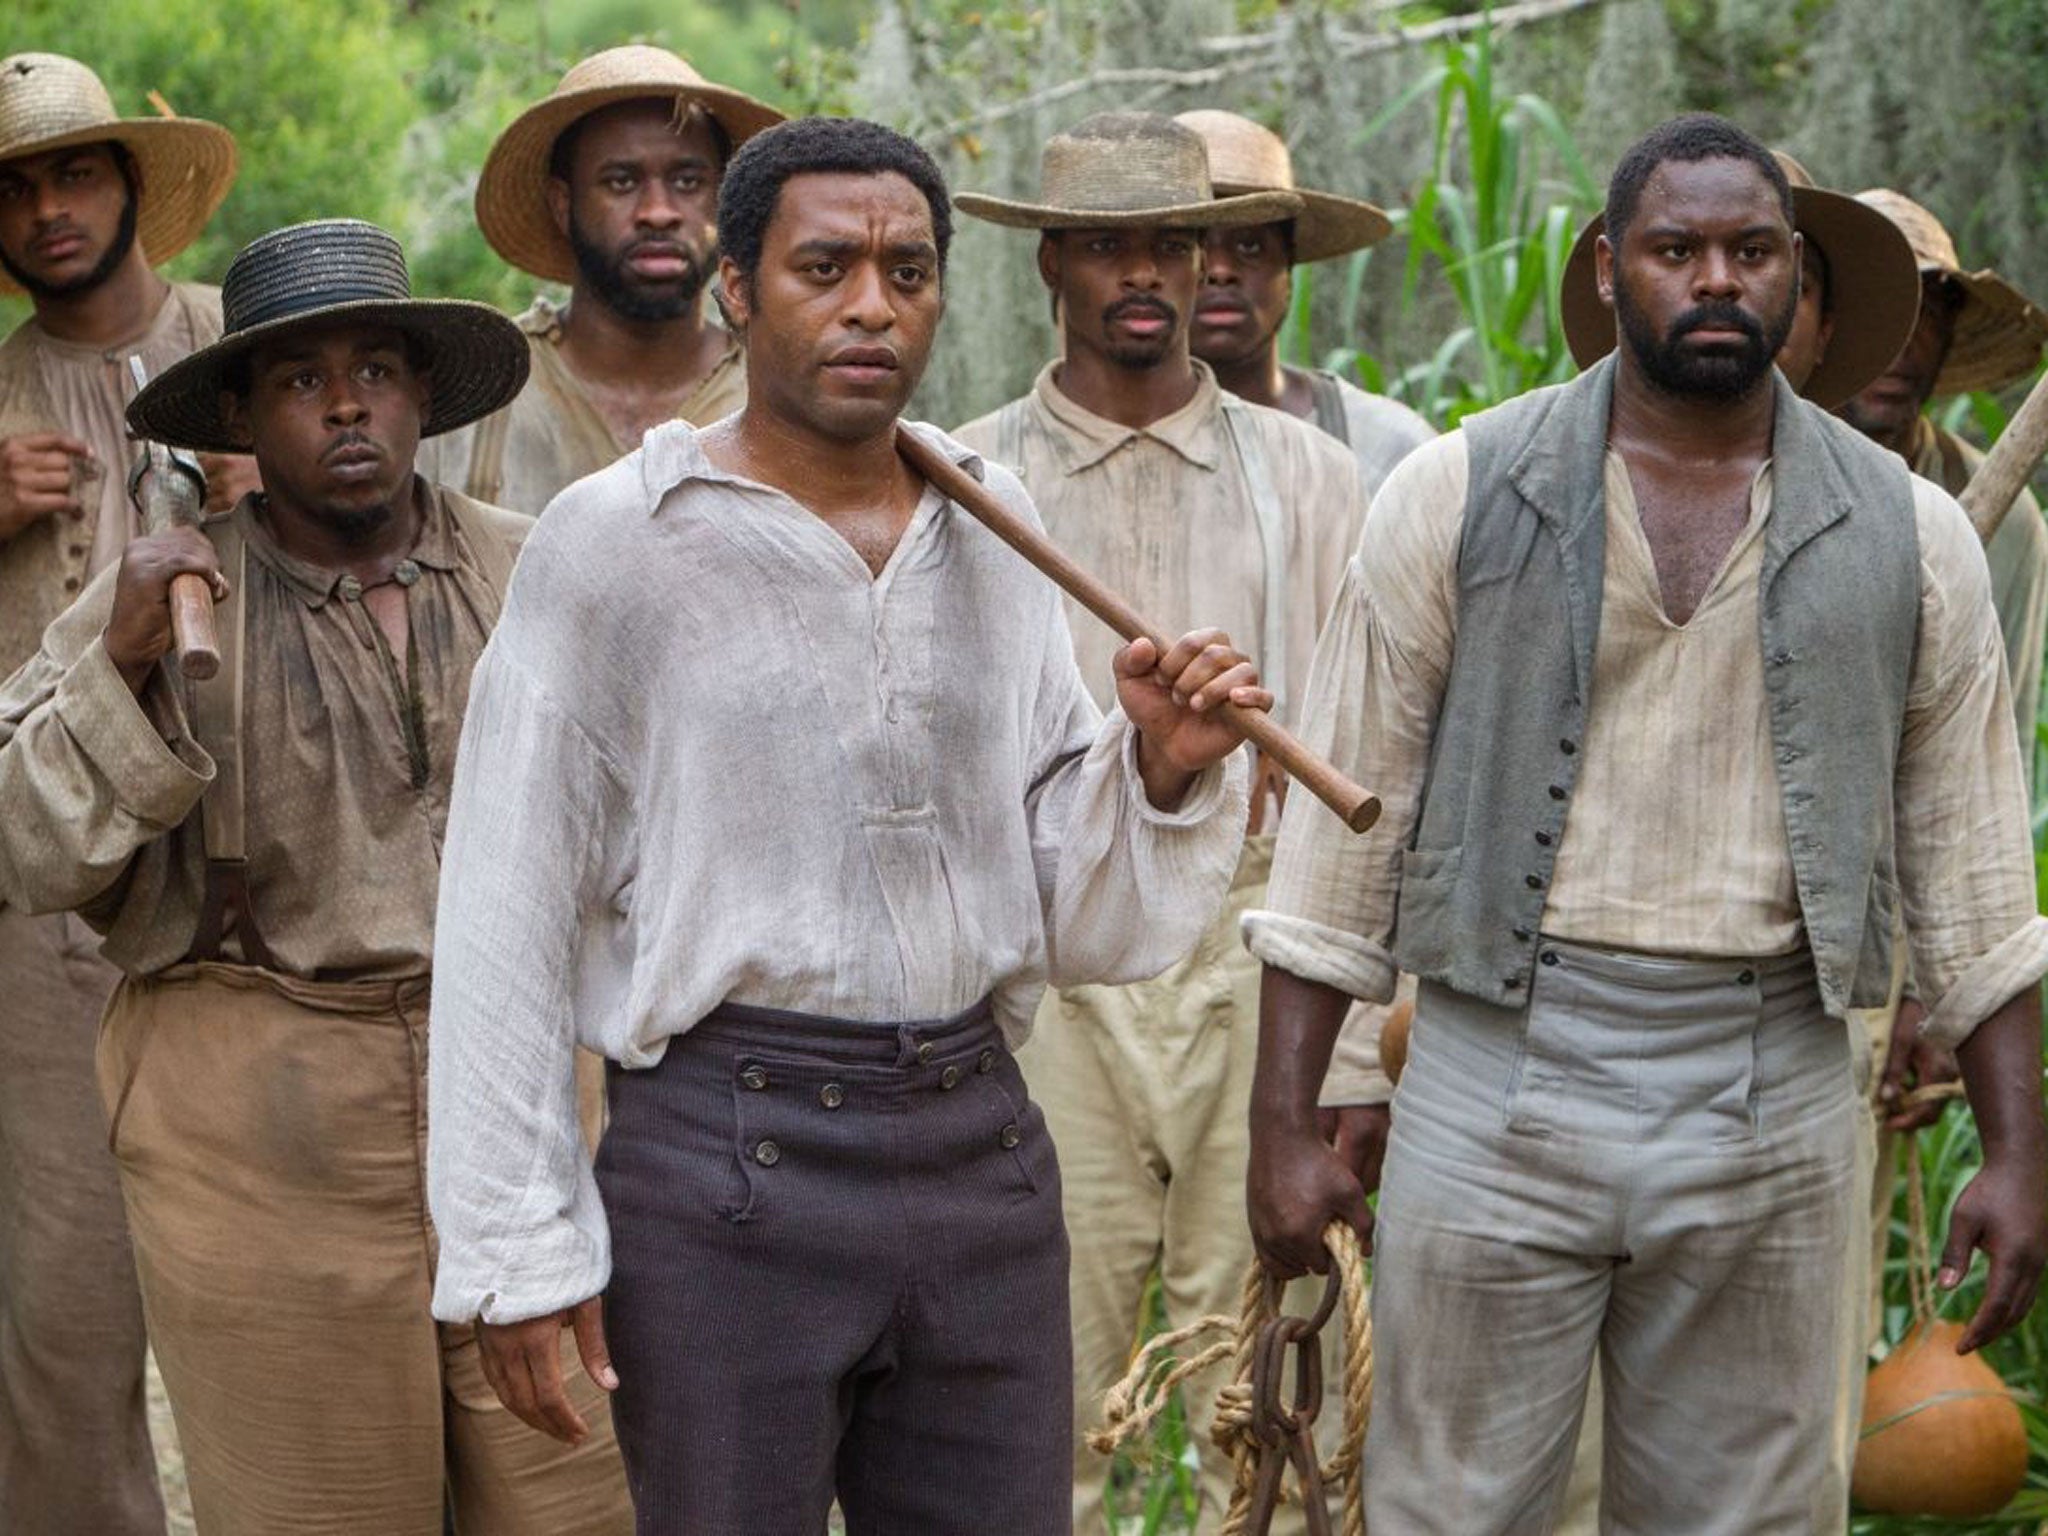 12 Years a Slave didn't depict the 'happy slaves', critic ...